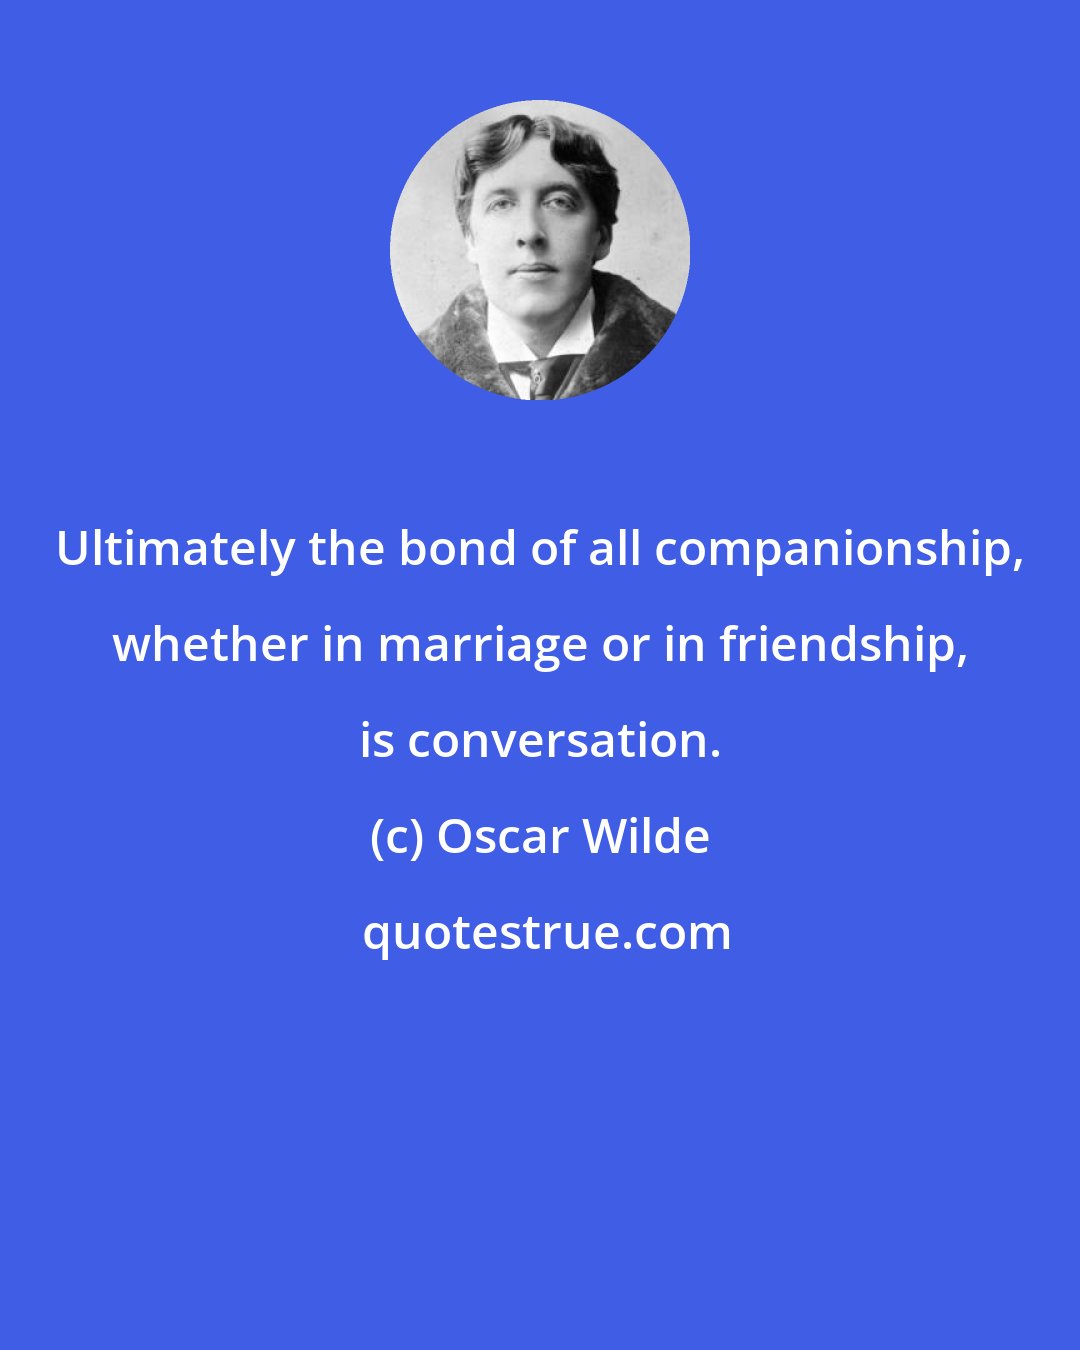 Oscar Wilde: Ultimately the bond of all companionship, whether in marriage or in friendship, is conversation.